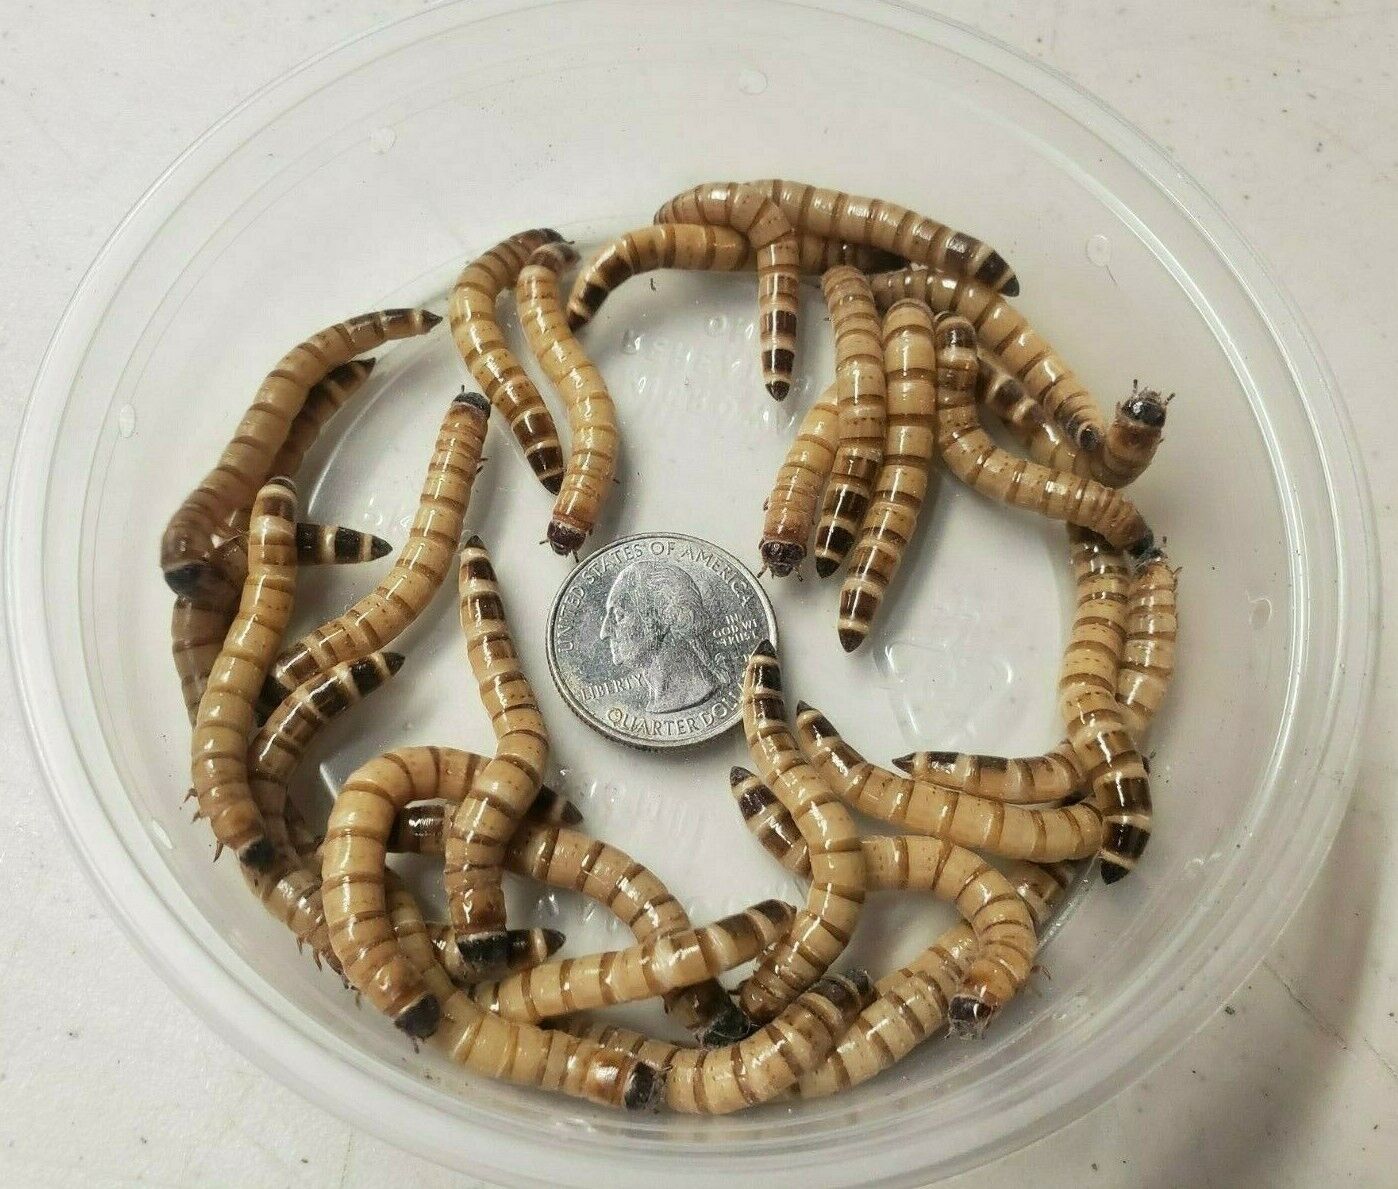 Superworms Reptile Feeders Large 100+, 250+, 500+, 1000+